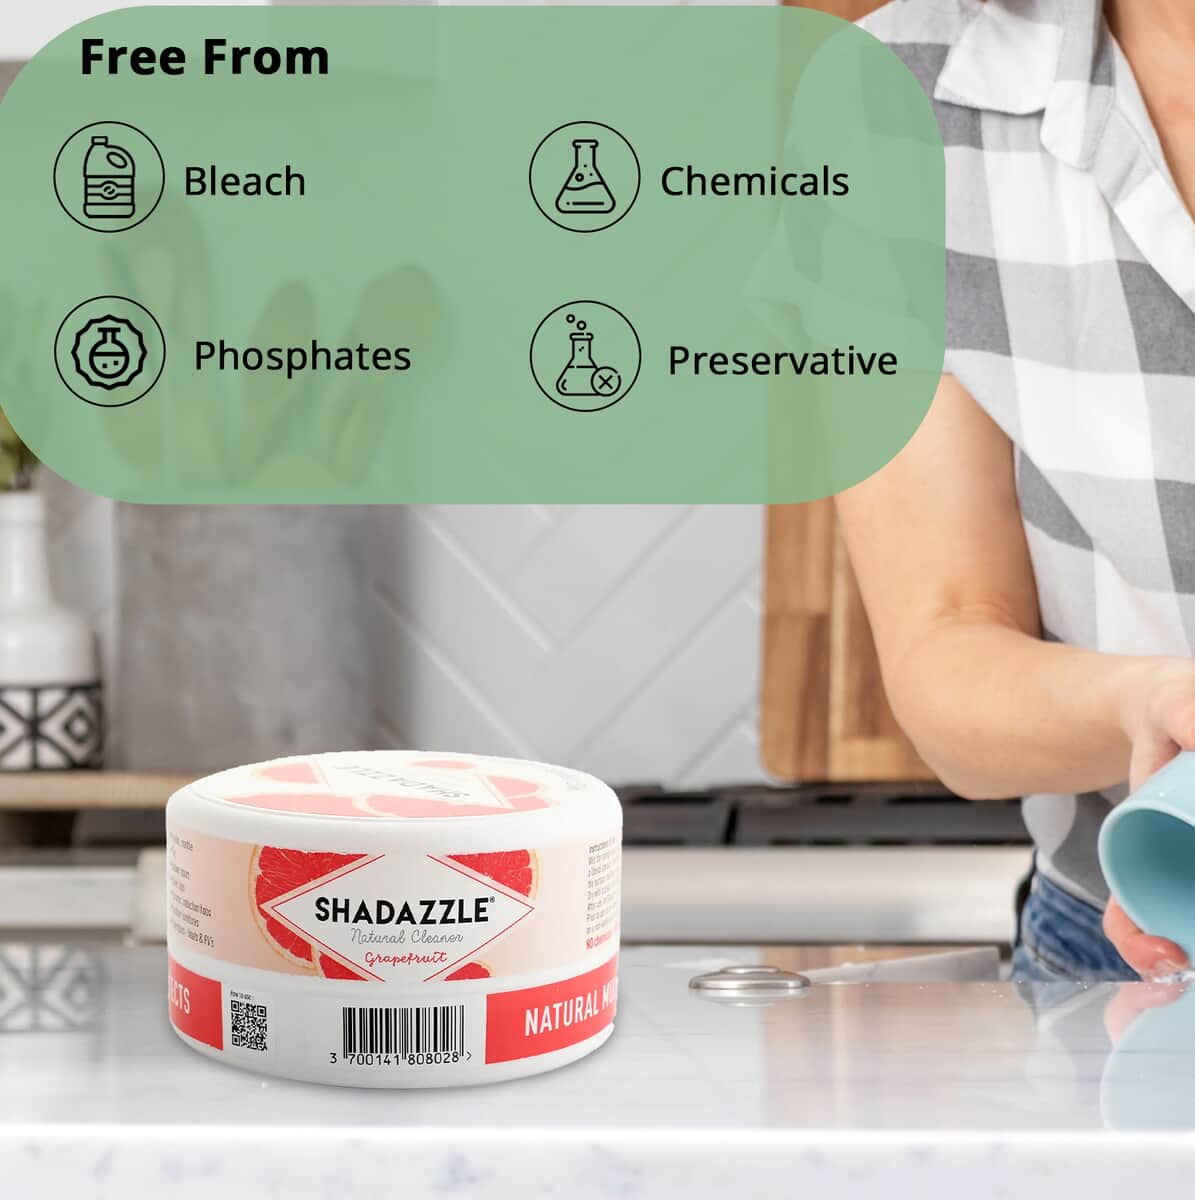 Shadazzle Multi-purpose Cleaner and Polish For Removing Tough Stains, Aluminium Wheels Cleaner, Copper Pots and Pans Cleaner- Grapefruit image number 2